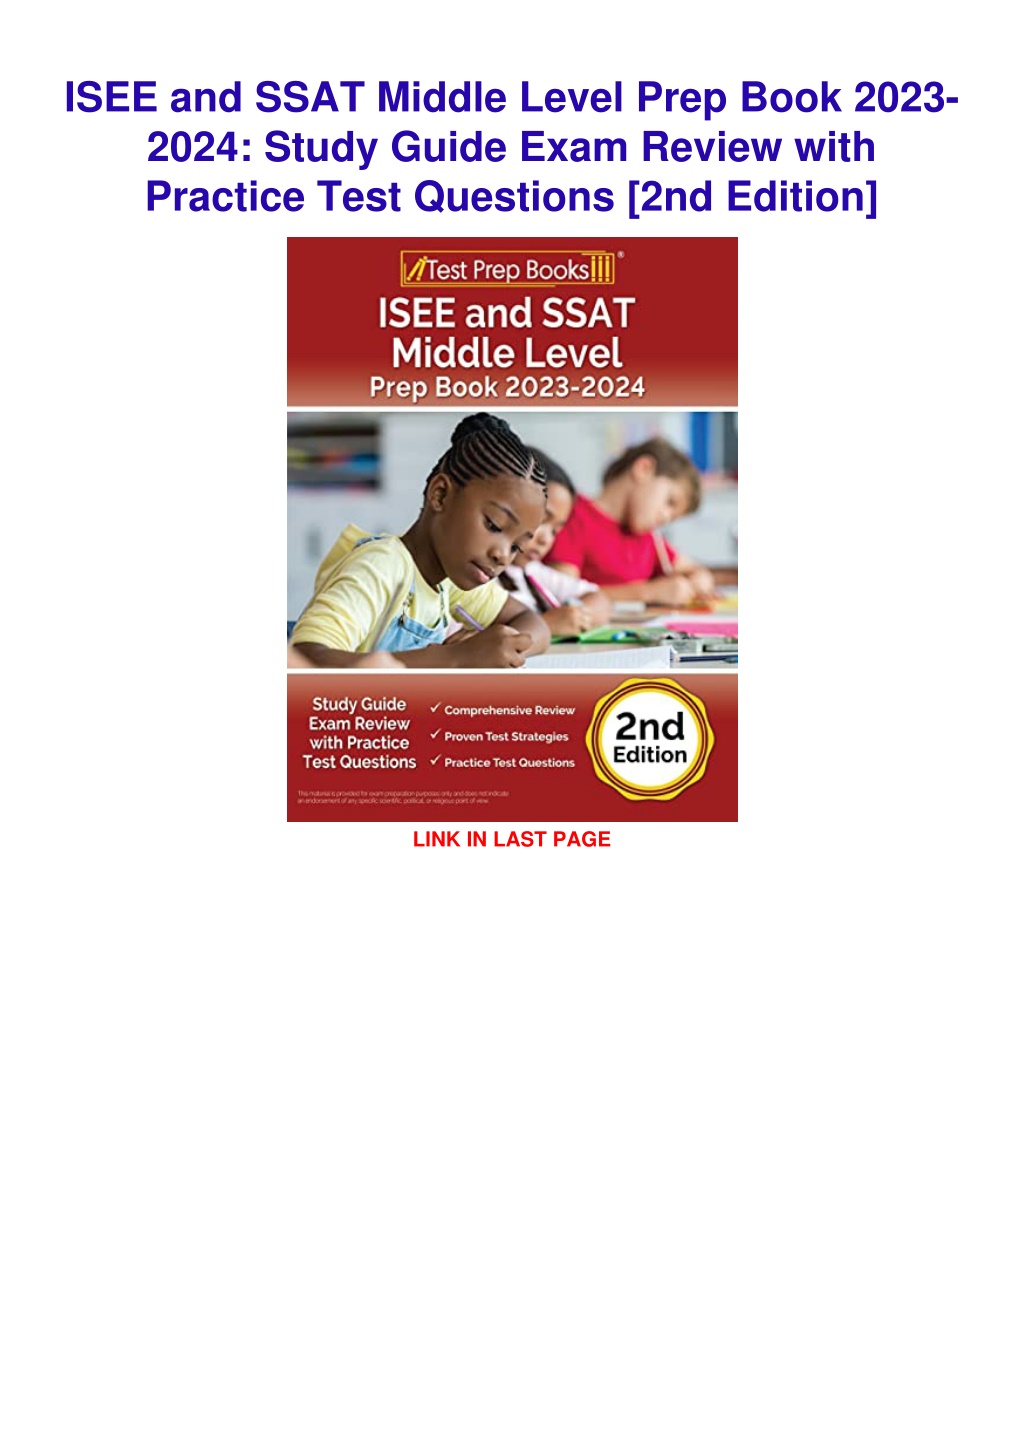 PPT PDF/READ/DOWNLOAD ISEE and SSAT Middle Level Prep Book 2023